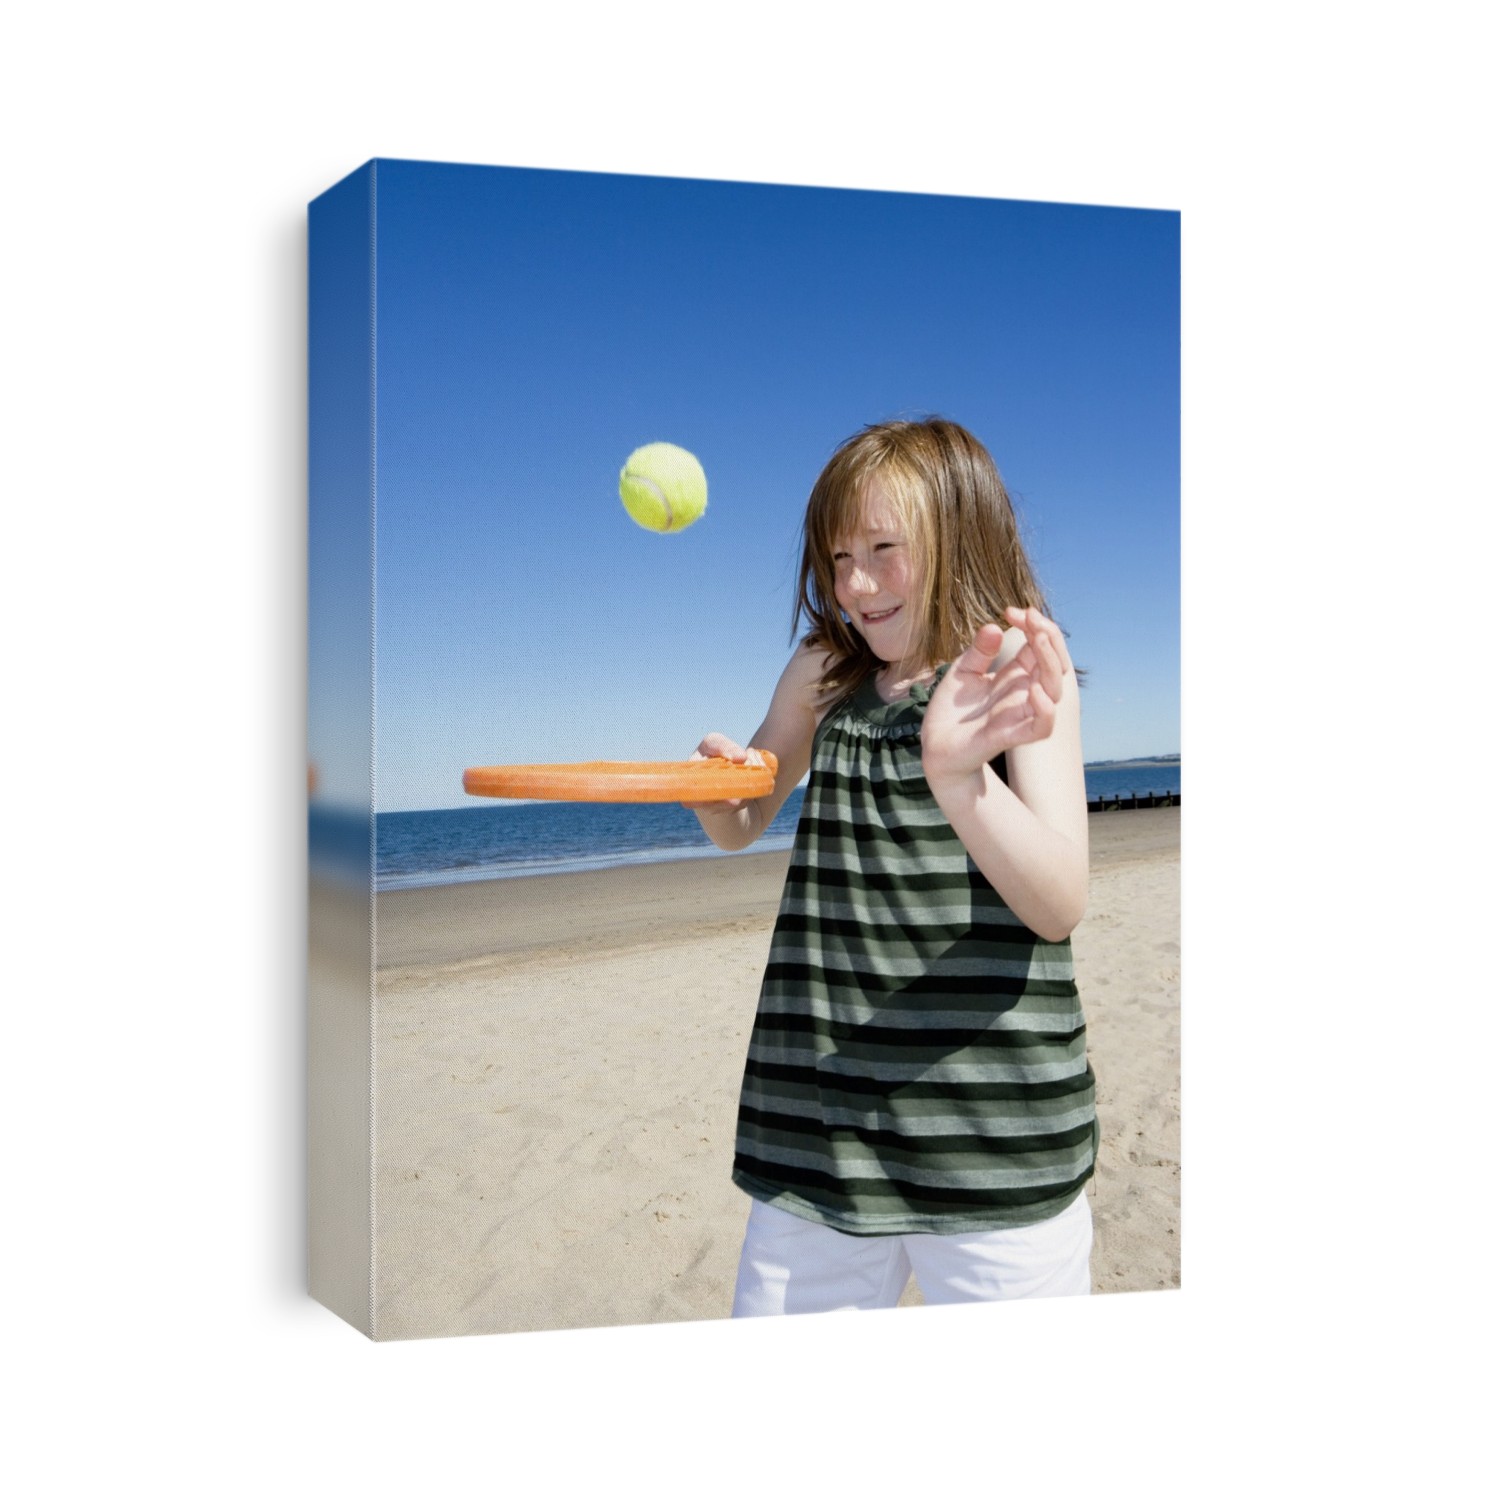 MODEL RELEASED. Girl playing with a bat and ball at a beach.